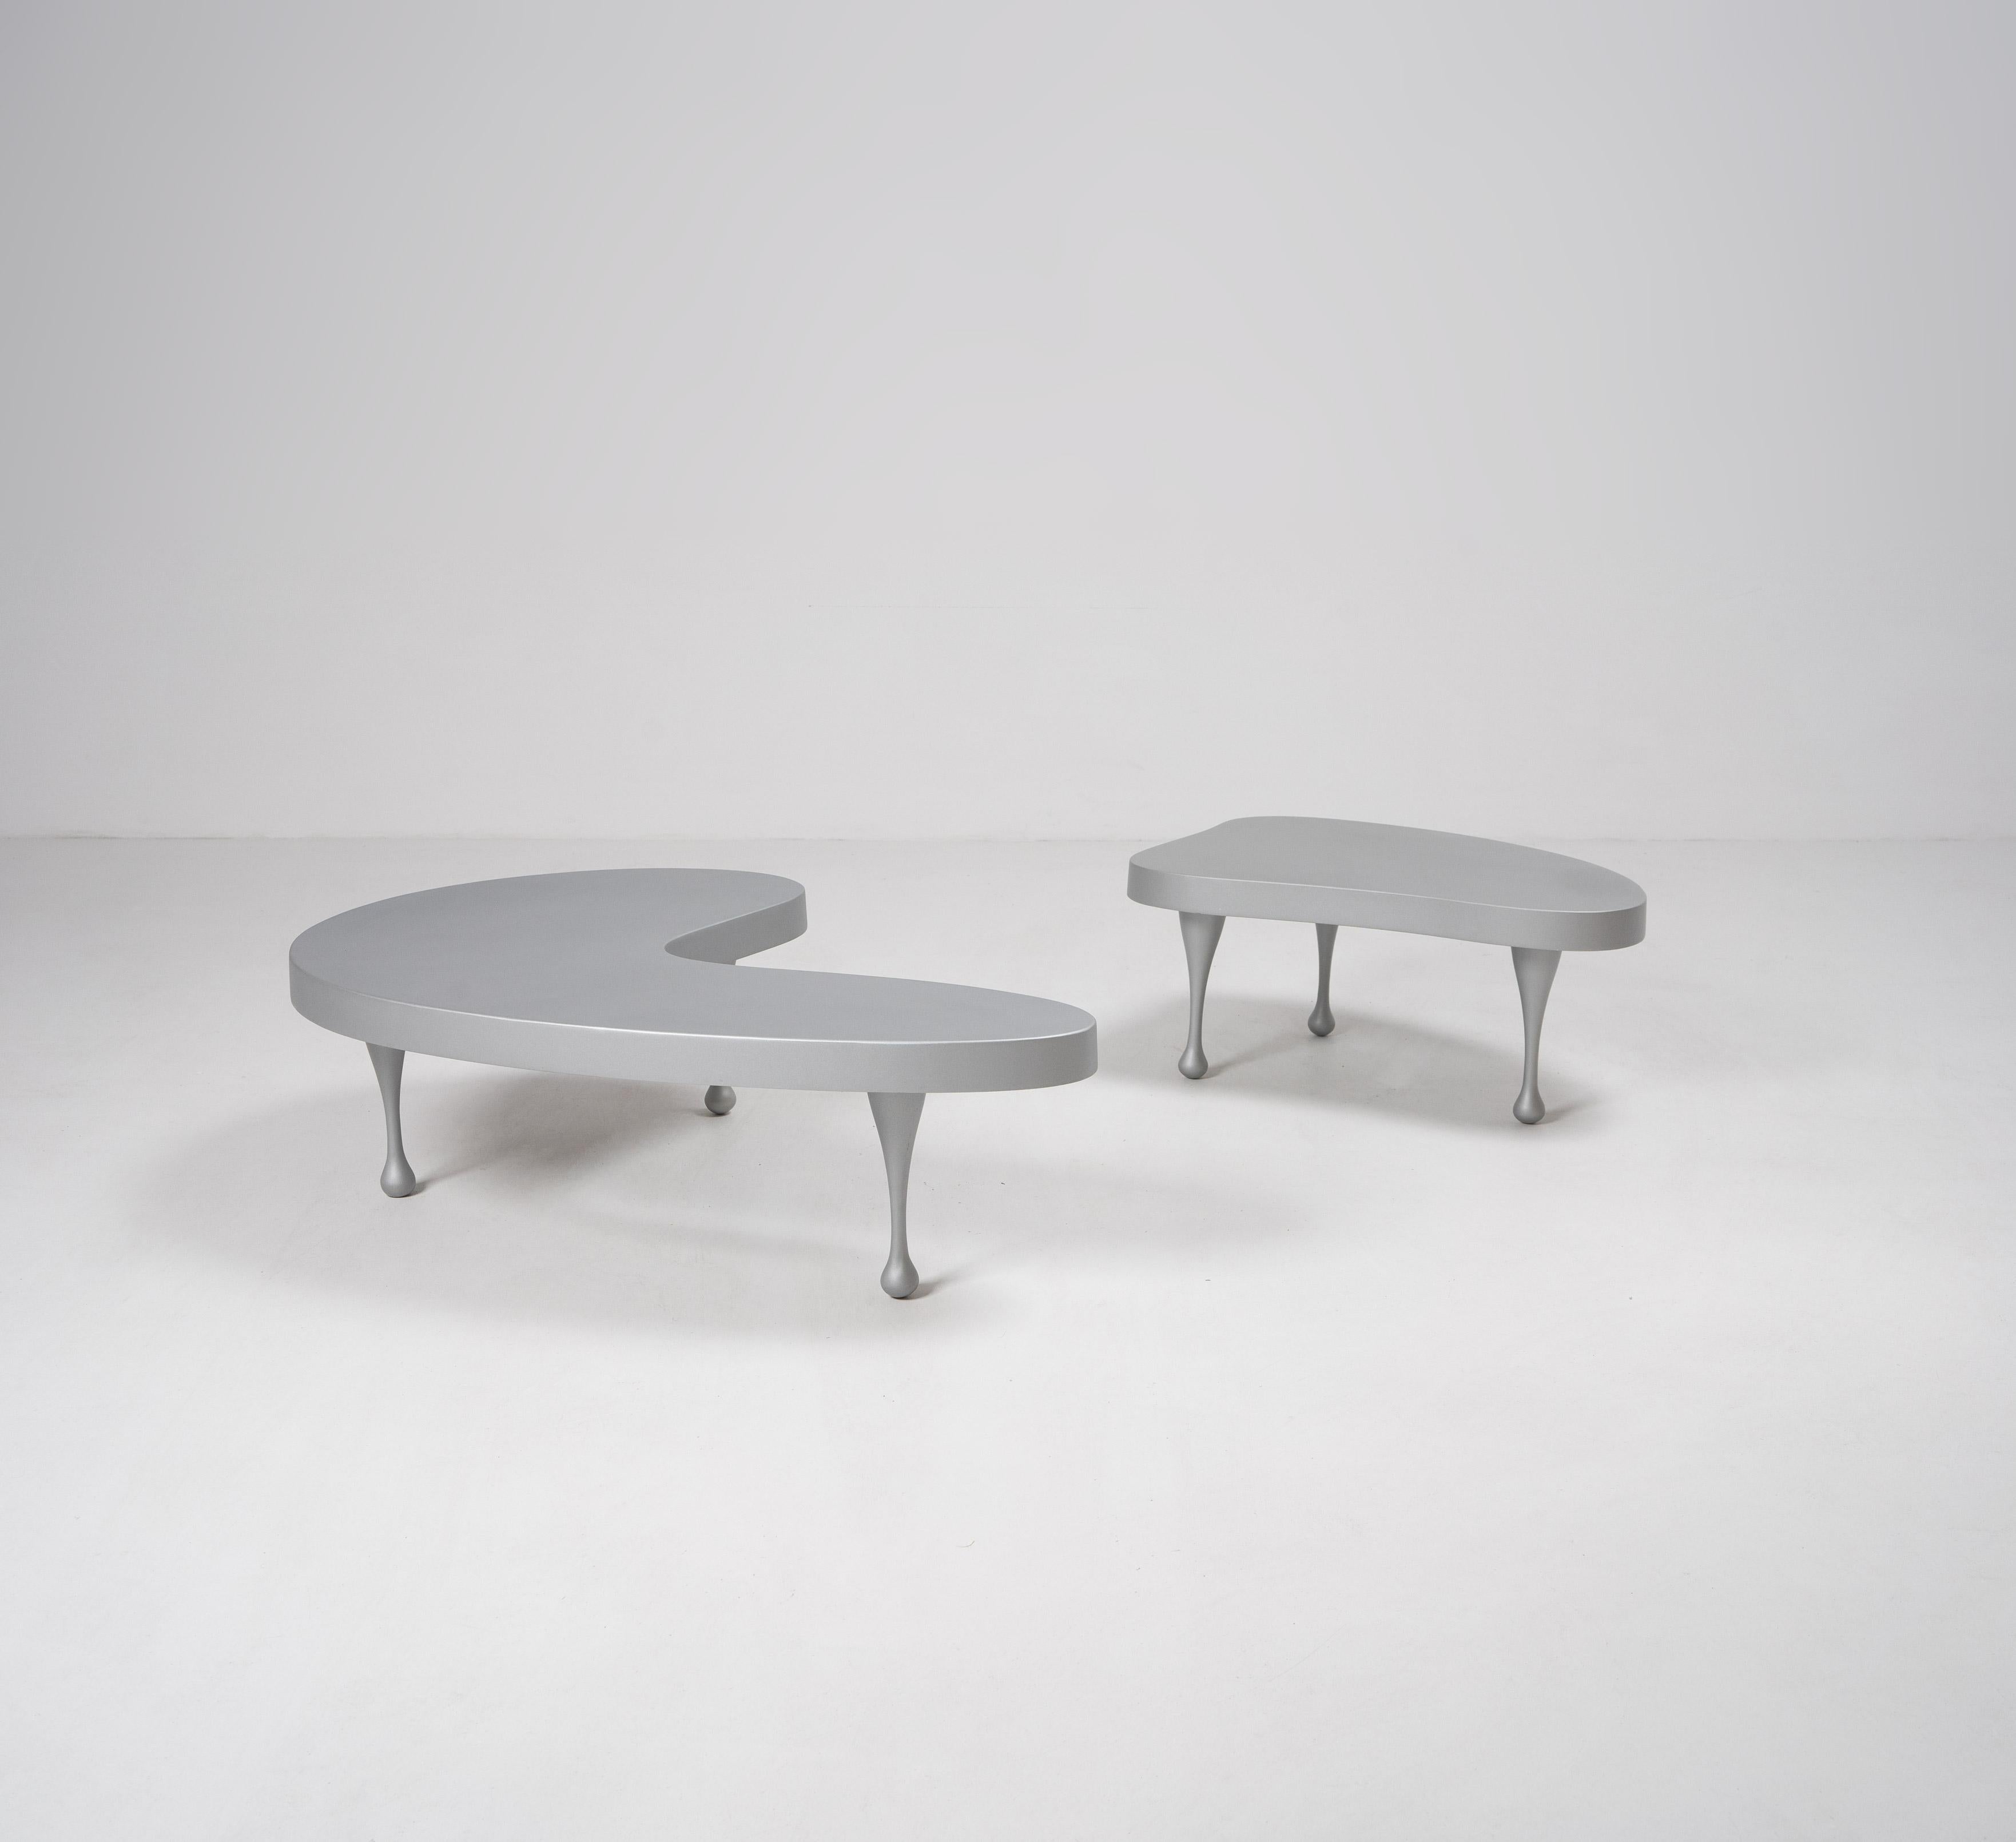 A late 20th century re-edition of Frederick Keisler's 1930's design. Composed of two low, cast aluminium tables, organic freeform in shape. 

Dimensions (cm, approx):

Large Table
Height: 25
Width: 89
Depth: 64

Small Table

Height: 25
Width: